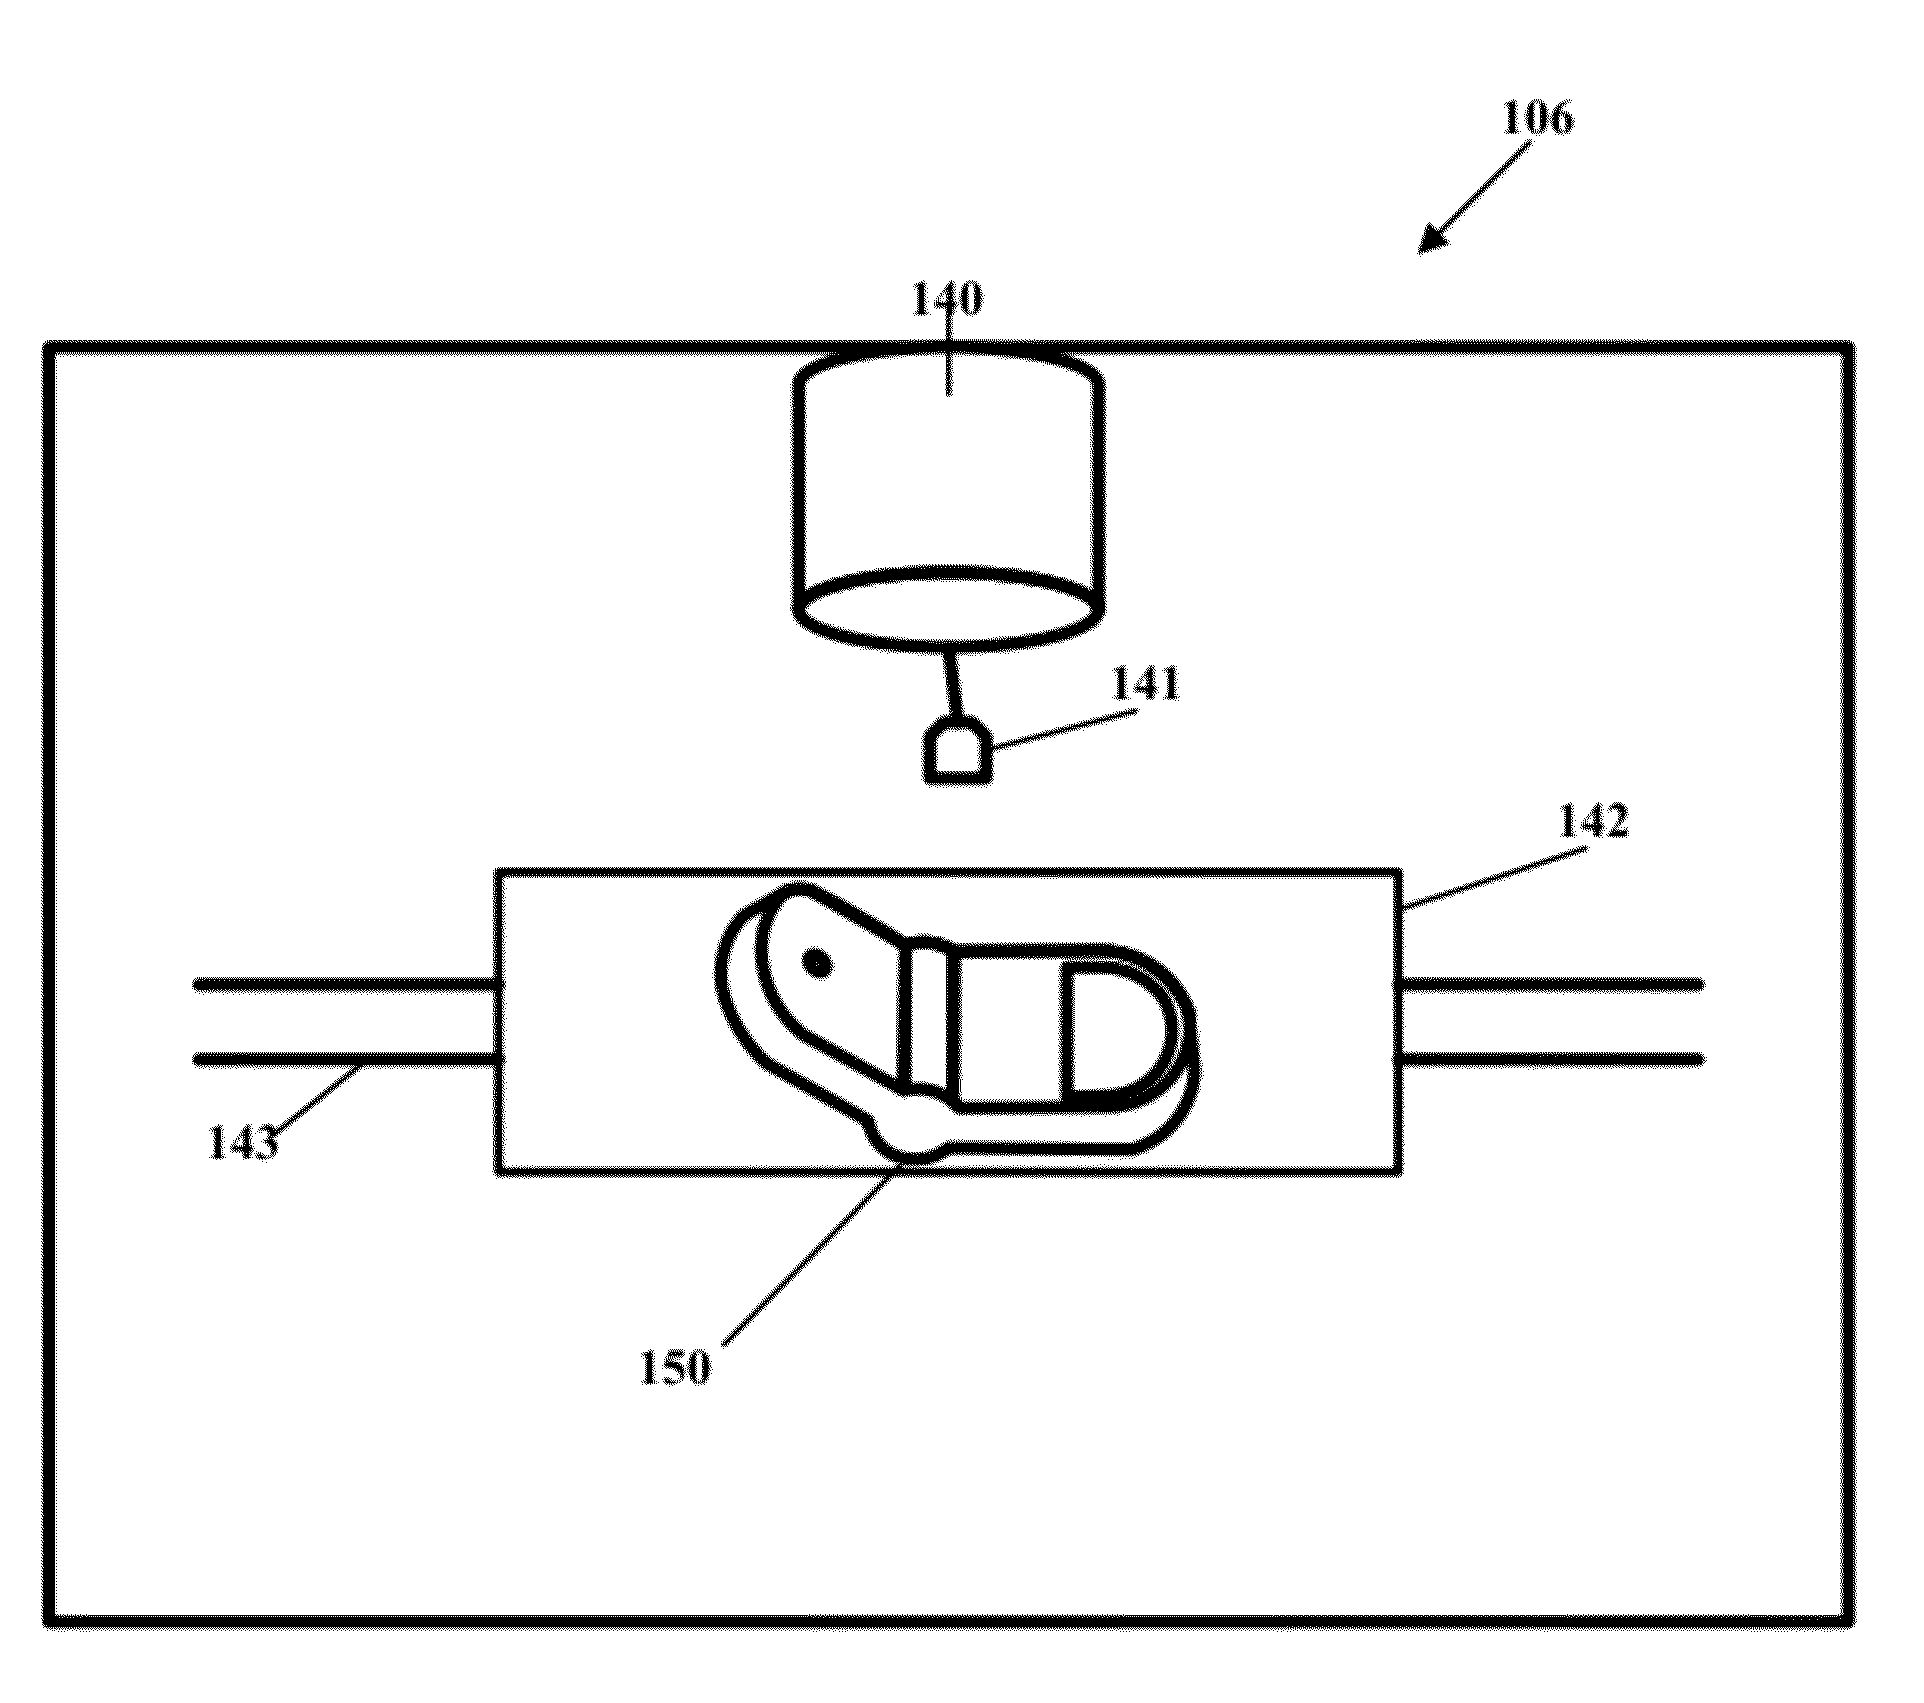 Apparatus and method for recycling mobile phones